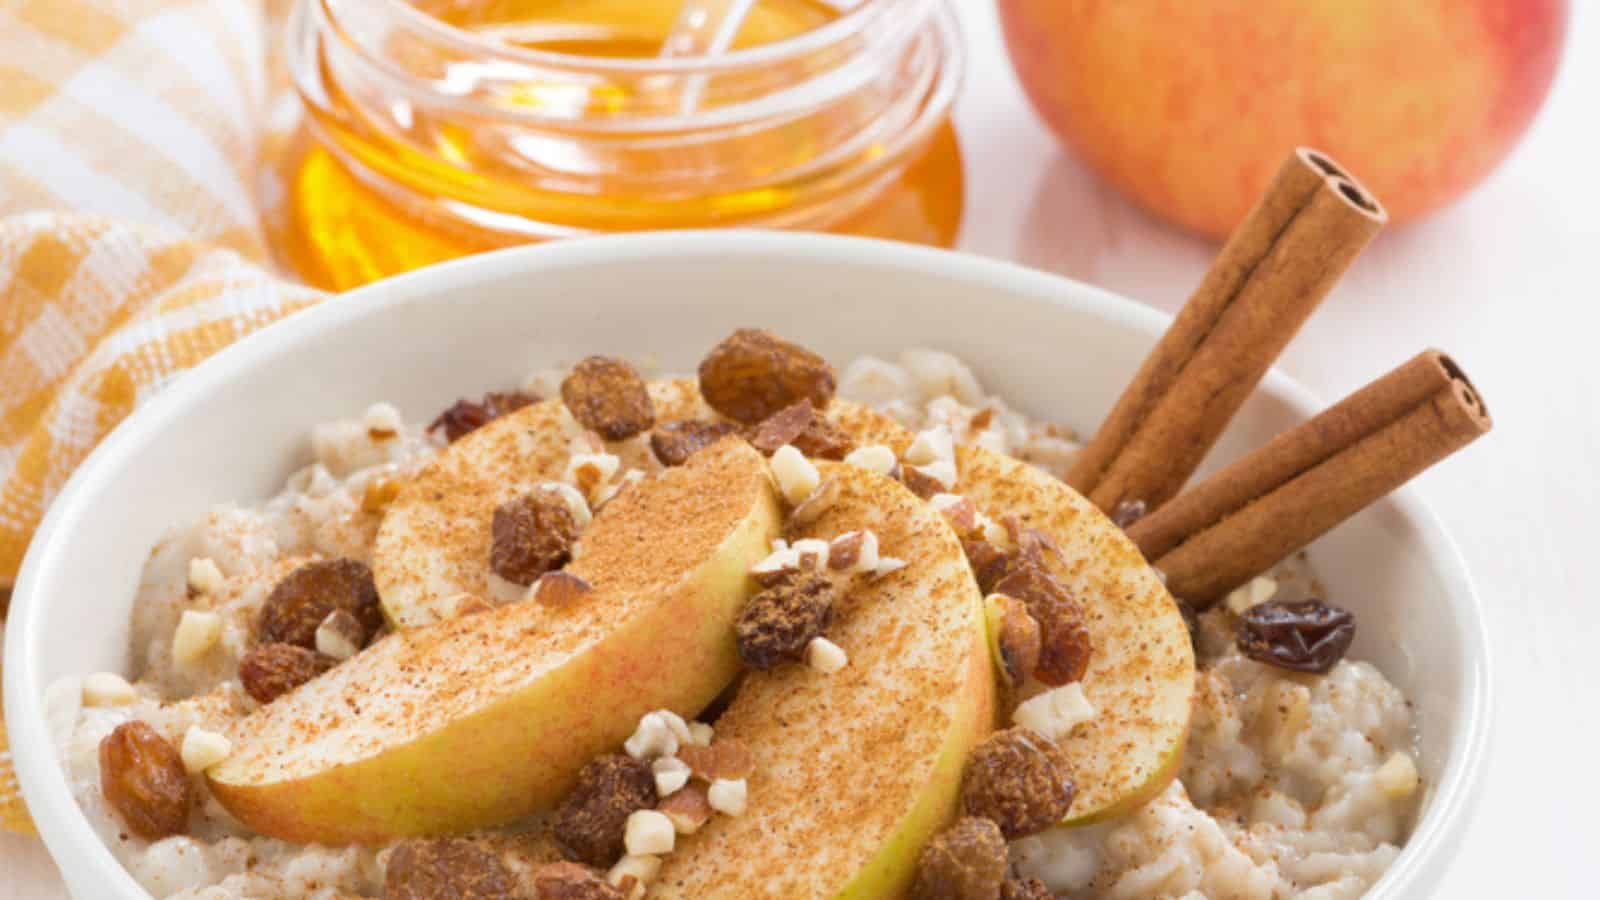 Oatmeal with apples, raisins, cinnamon and ingredients